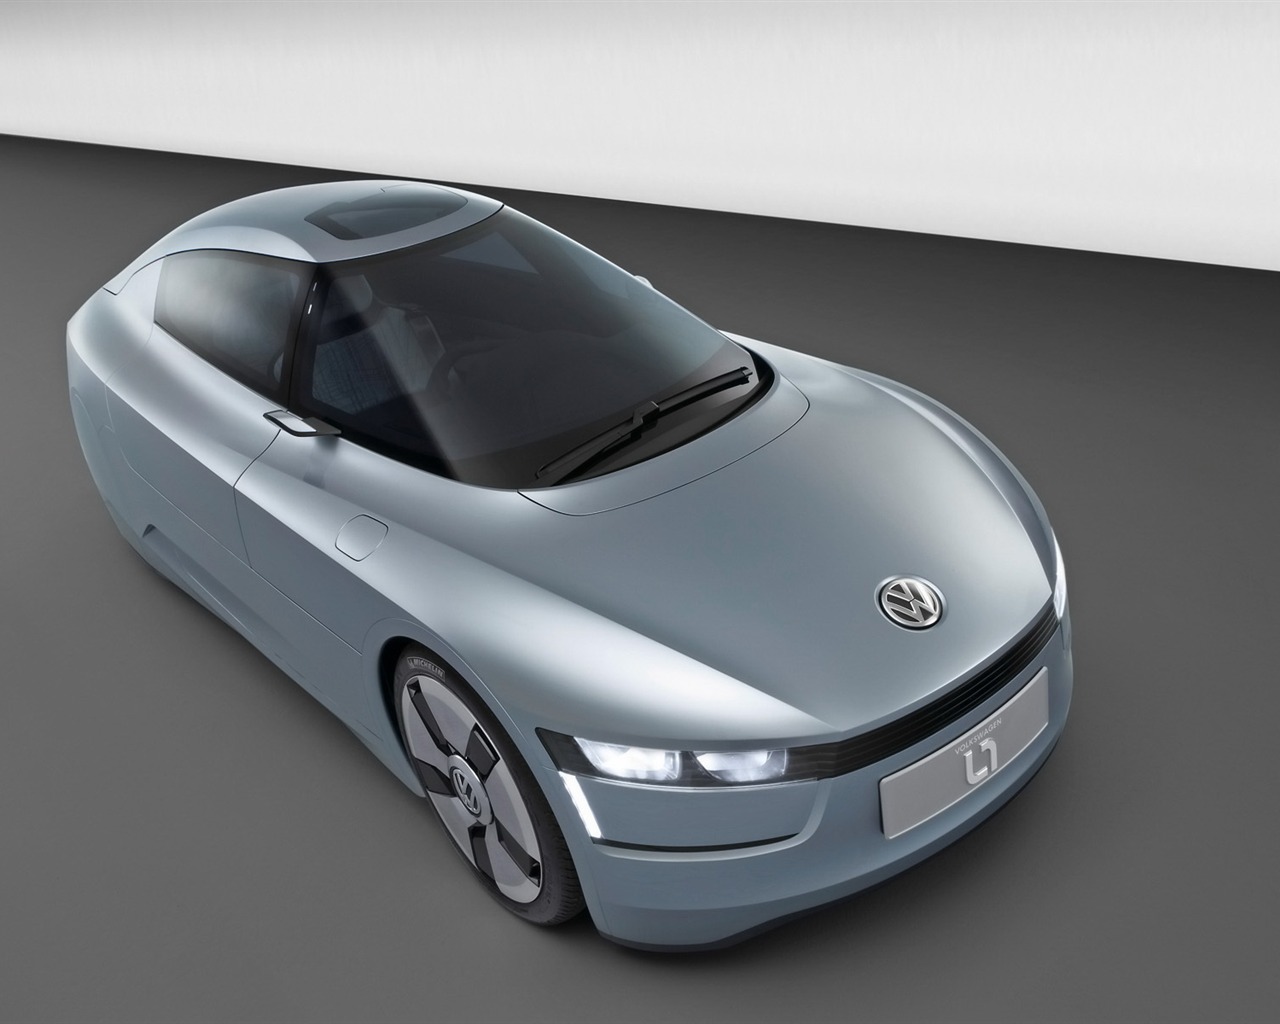 Volkswagen L1 Tapety Concept Car #21 - 1280x1024